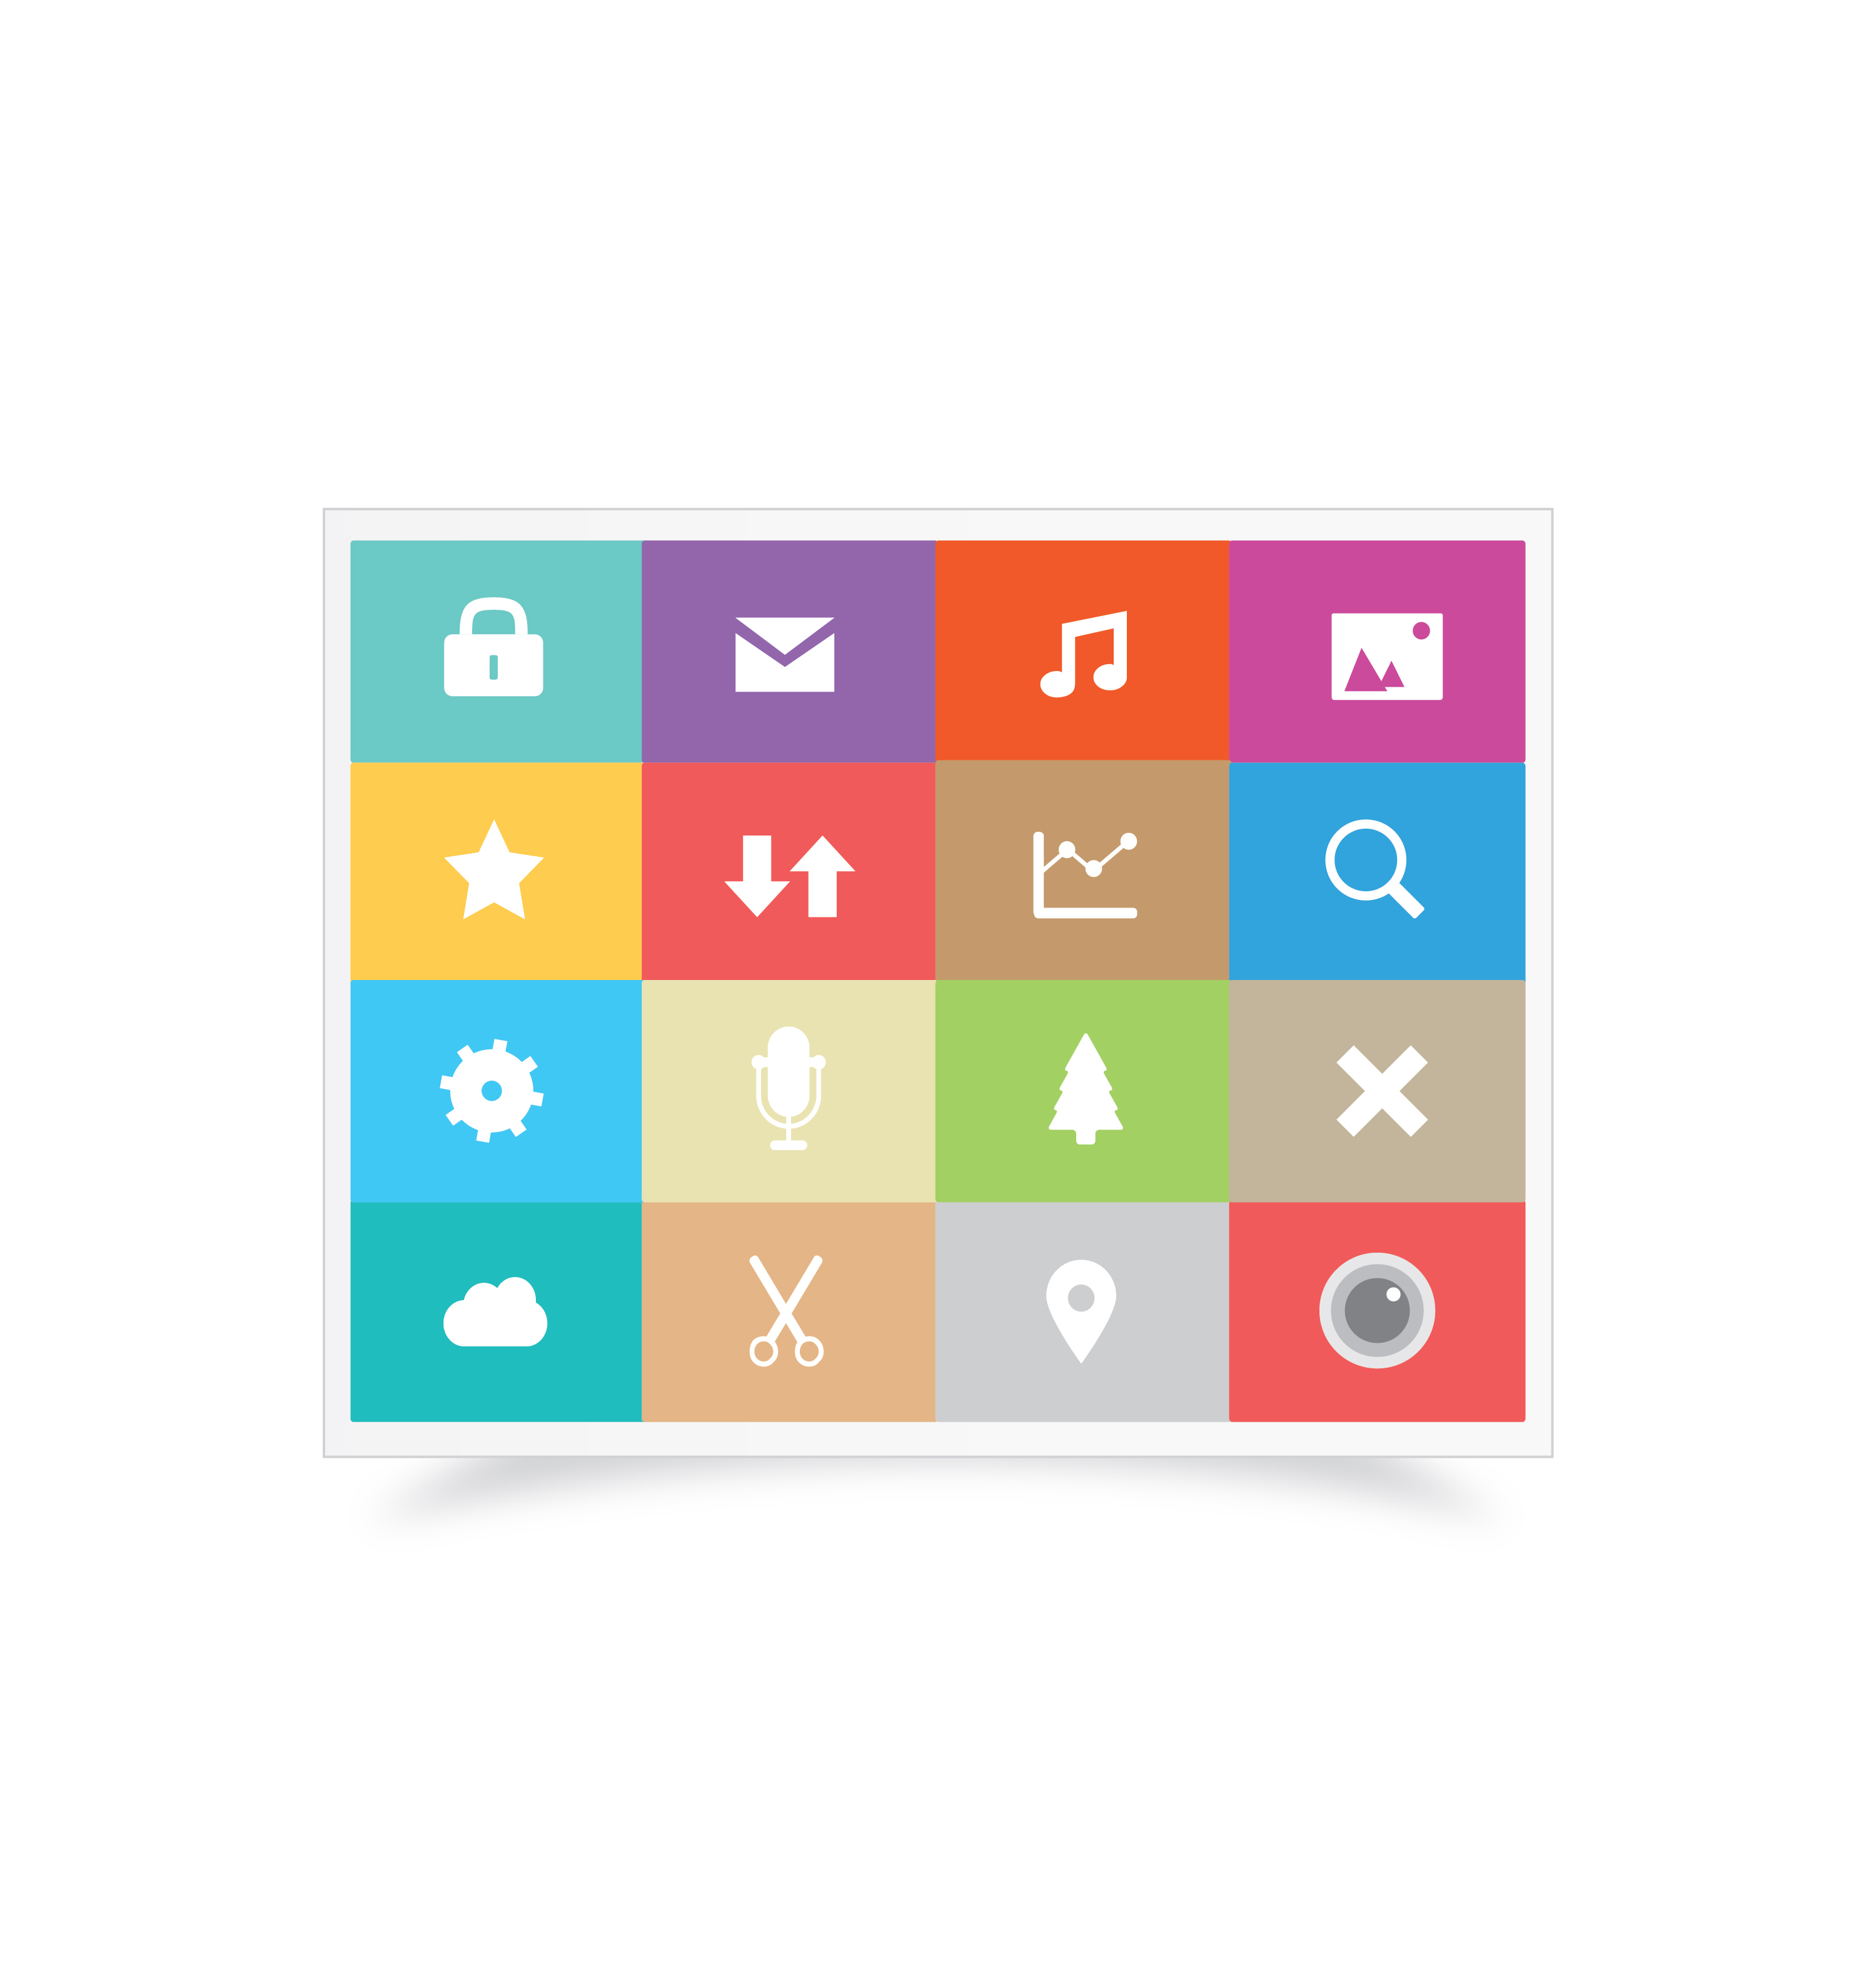 colorful icons set